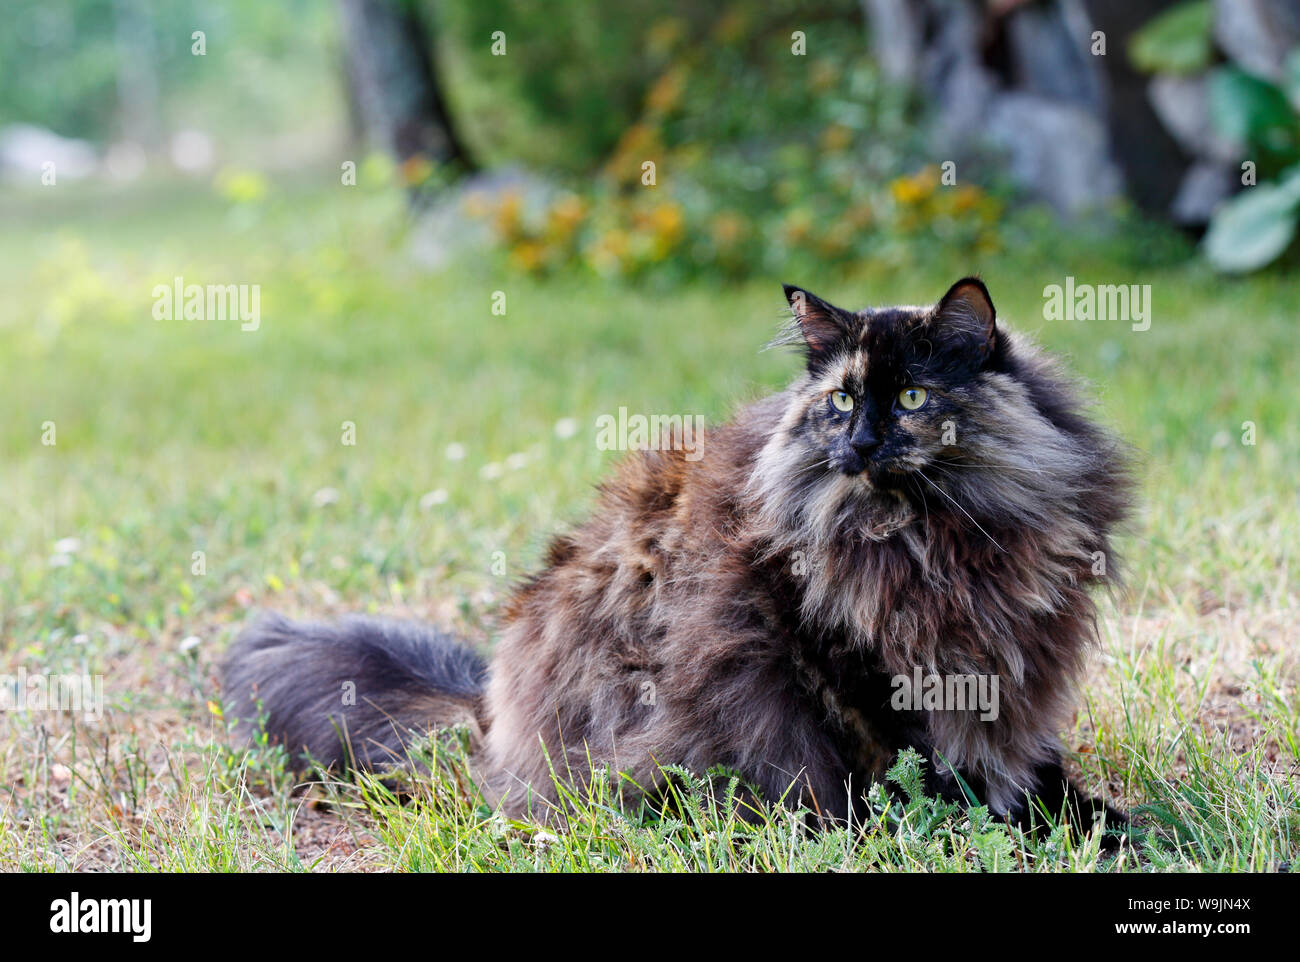 A strict looking tortoiseshell norwegian forest cat staring at the photographer Stock Photo